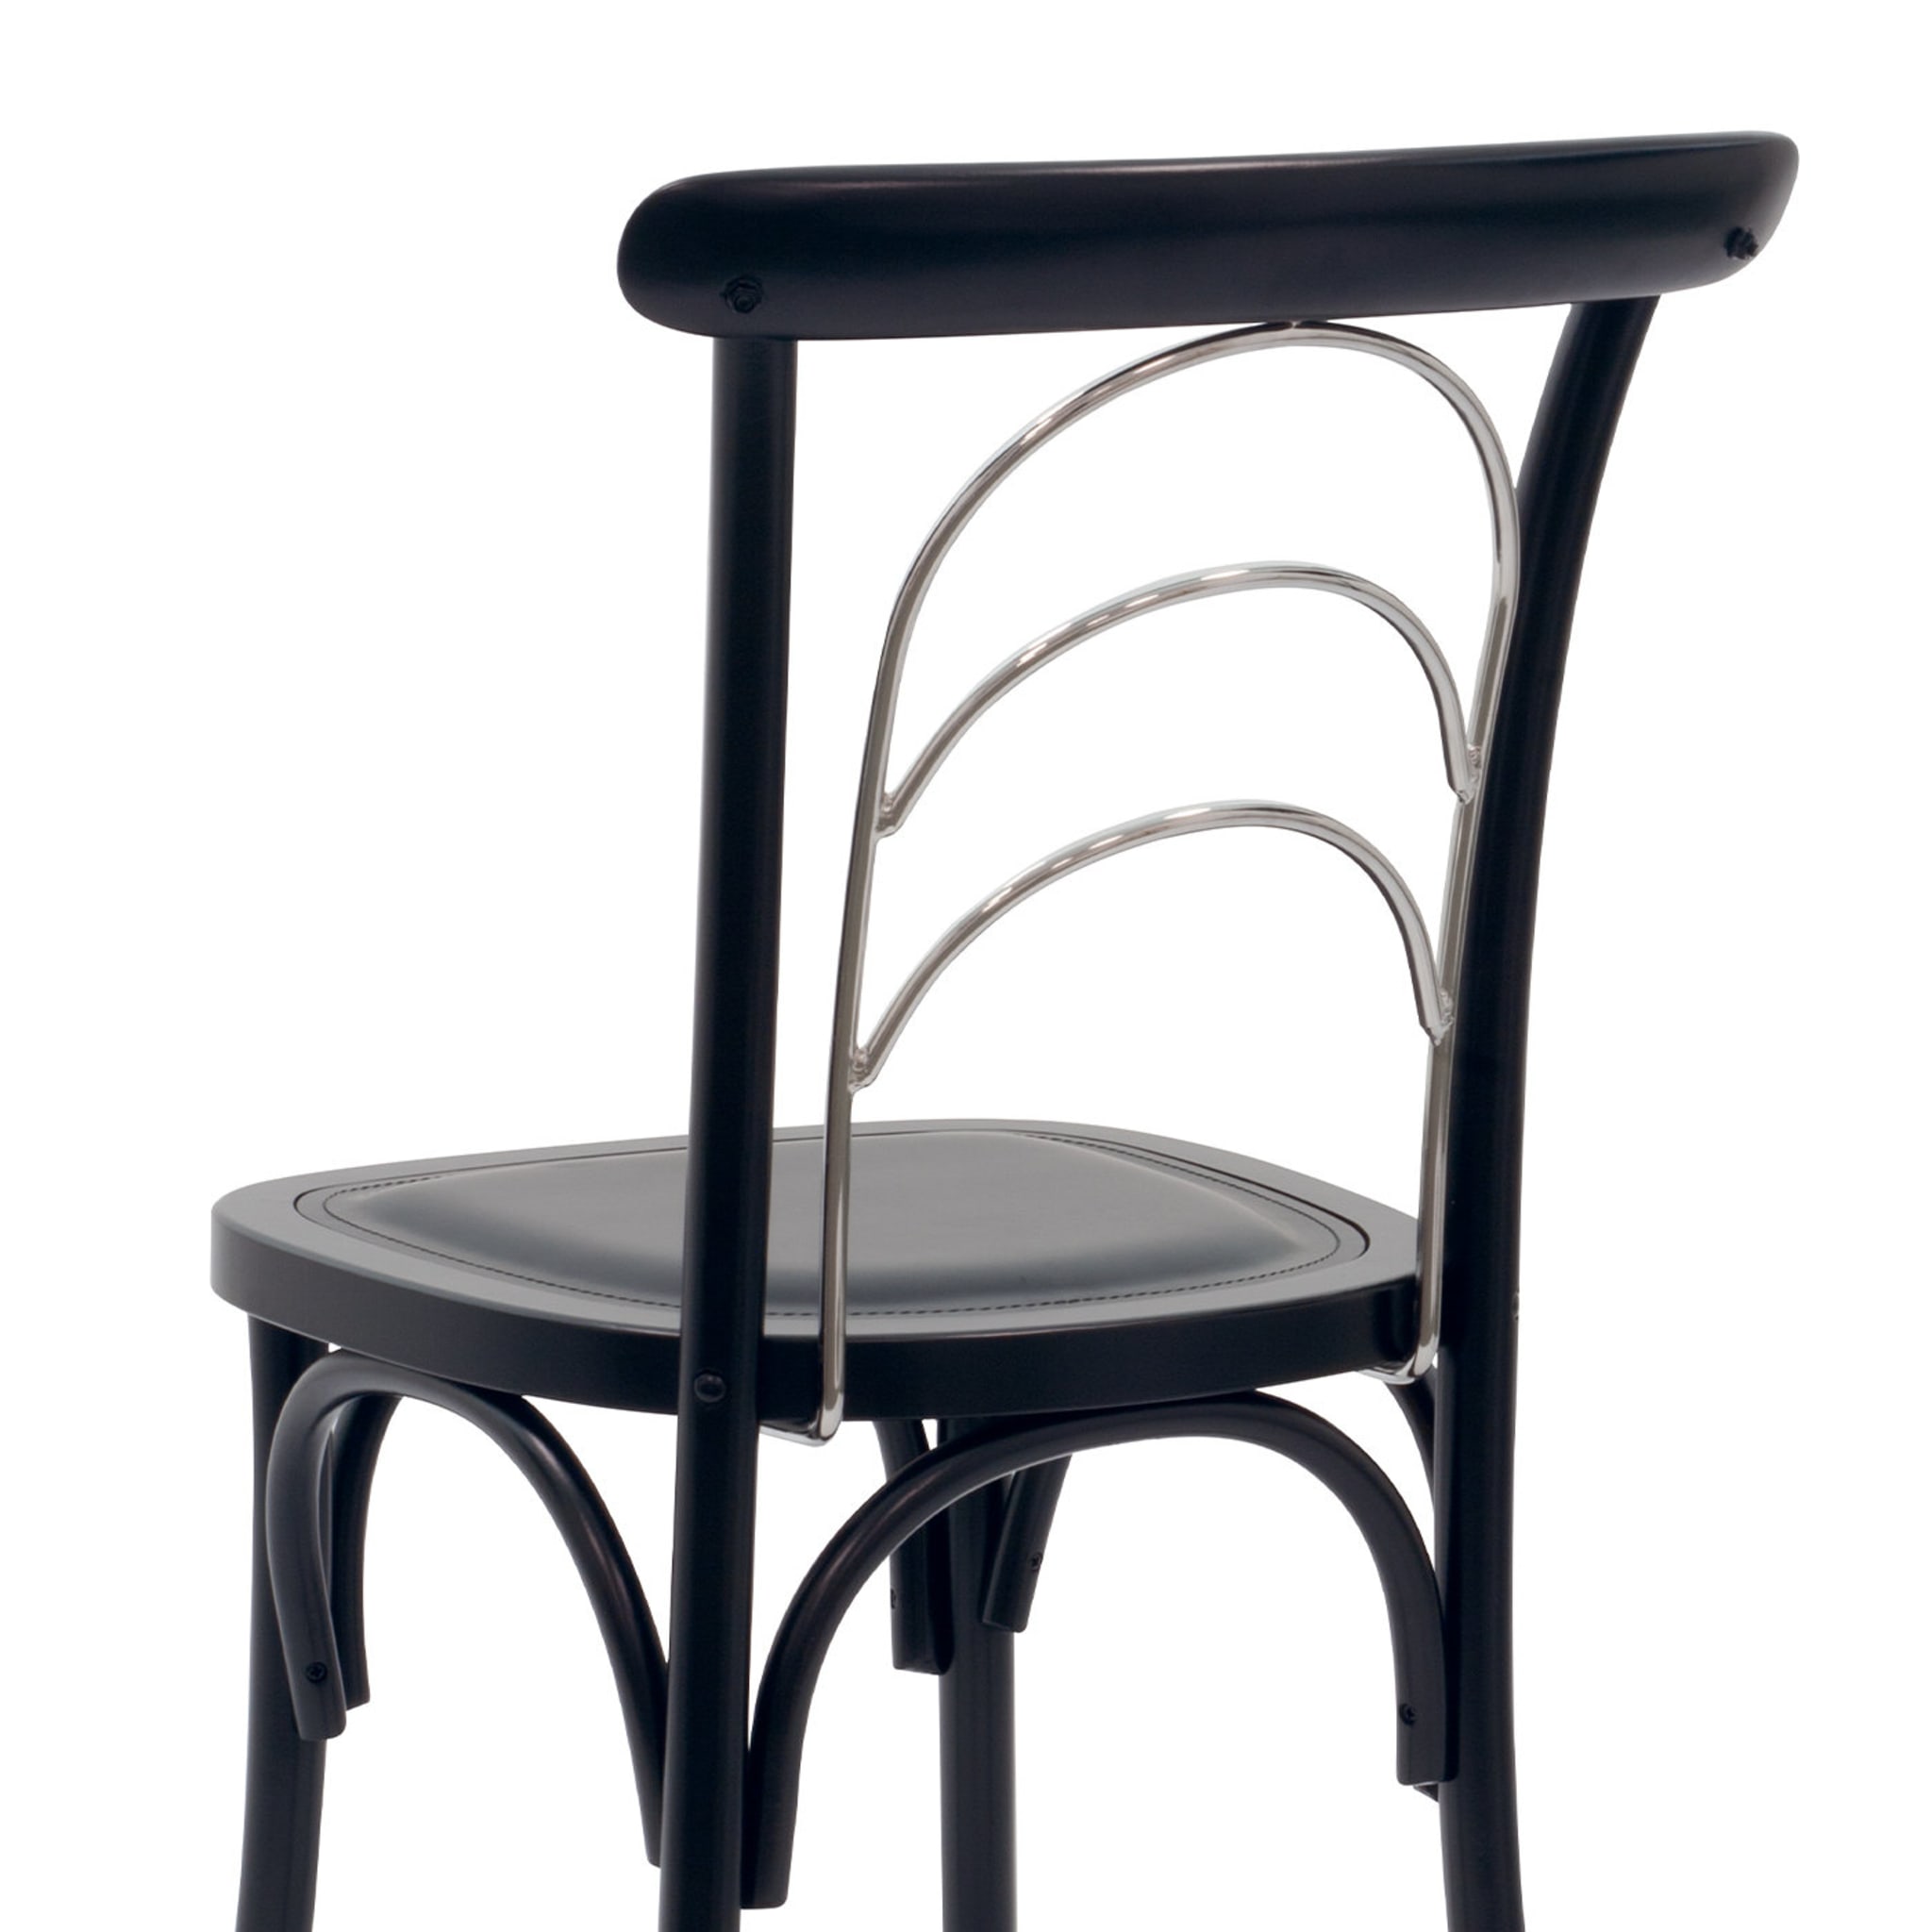 Ciao Arco Set of 2 Black Chairs - Alternative view 2